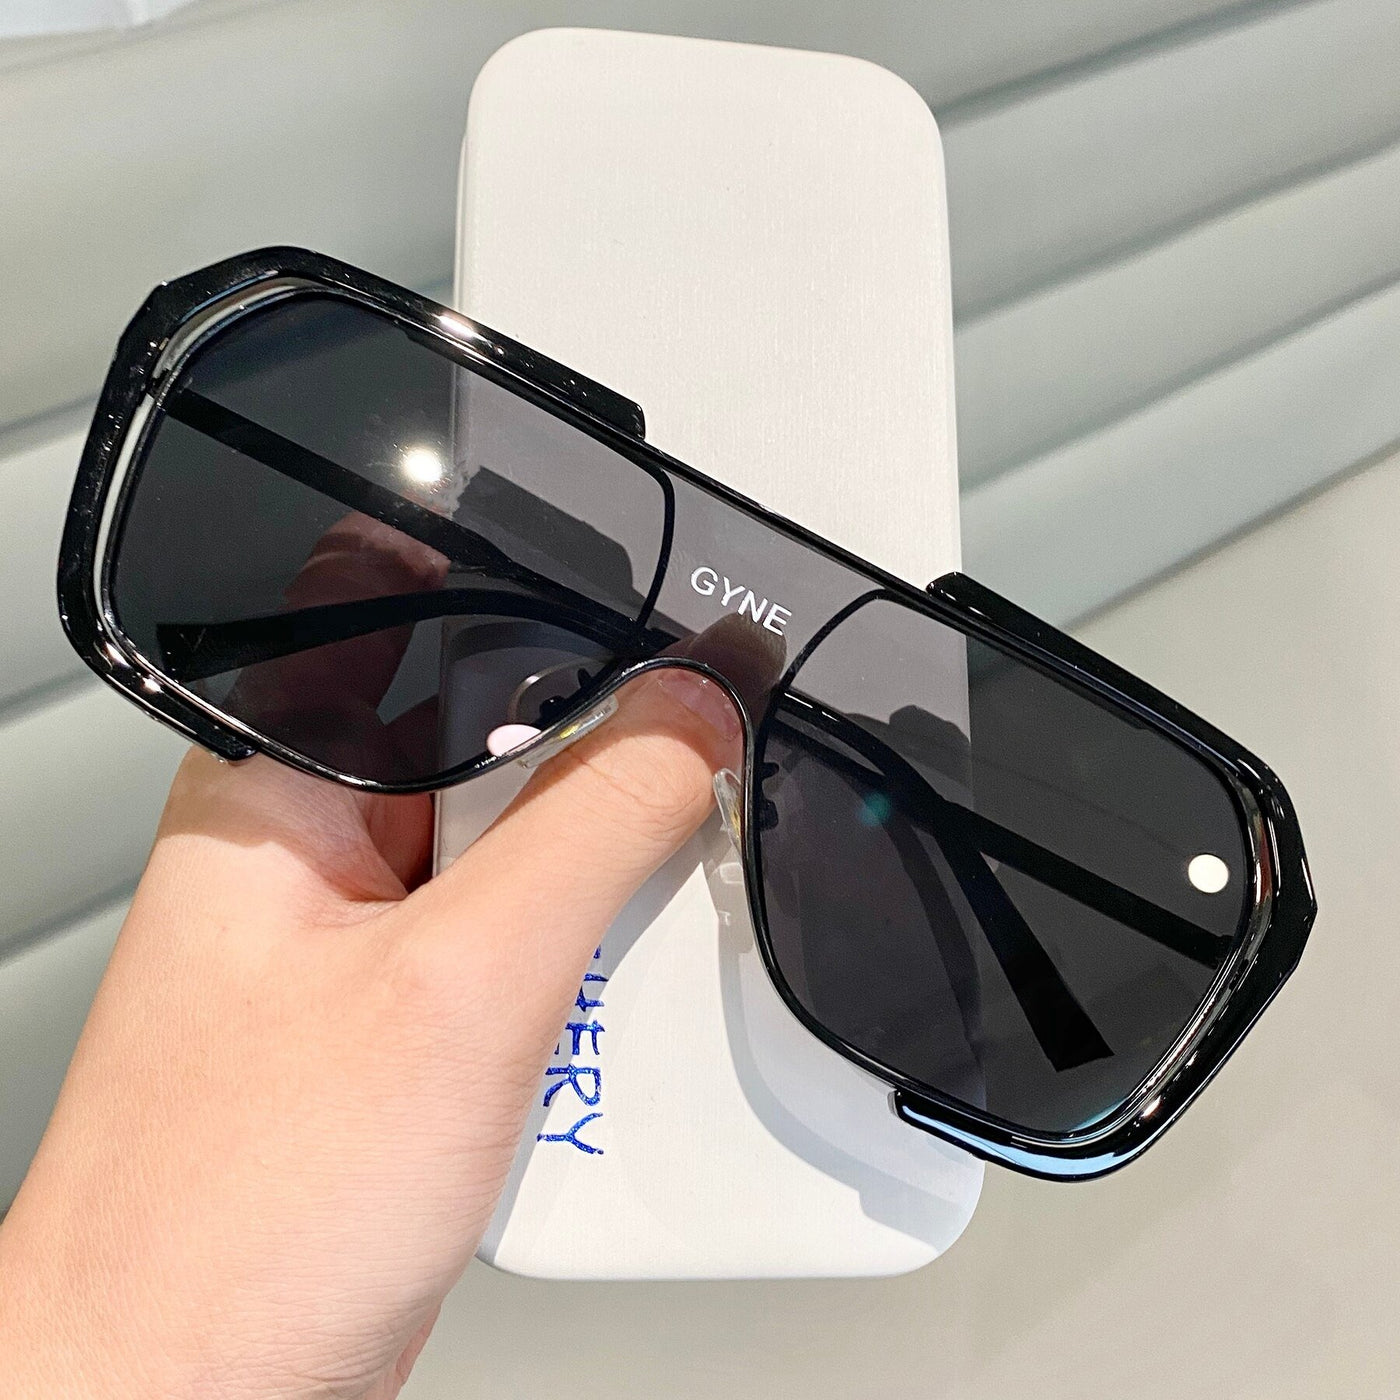 2020 One-Piece Large-Frame Square Sunglasses For Women And Men-Unique and Classy